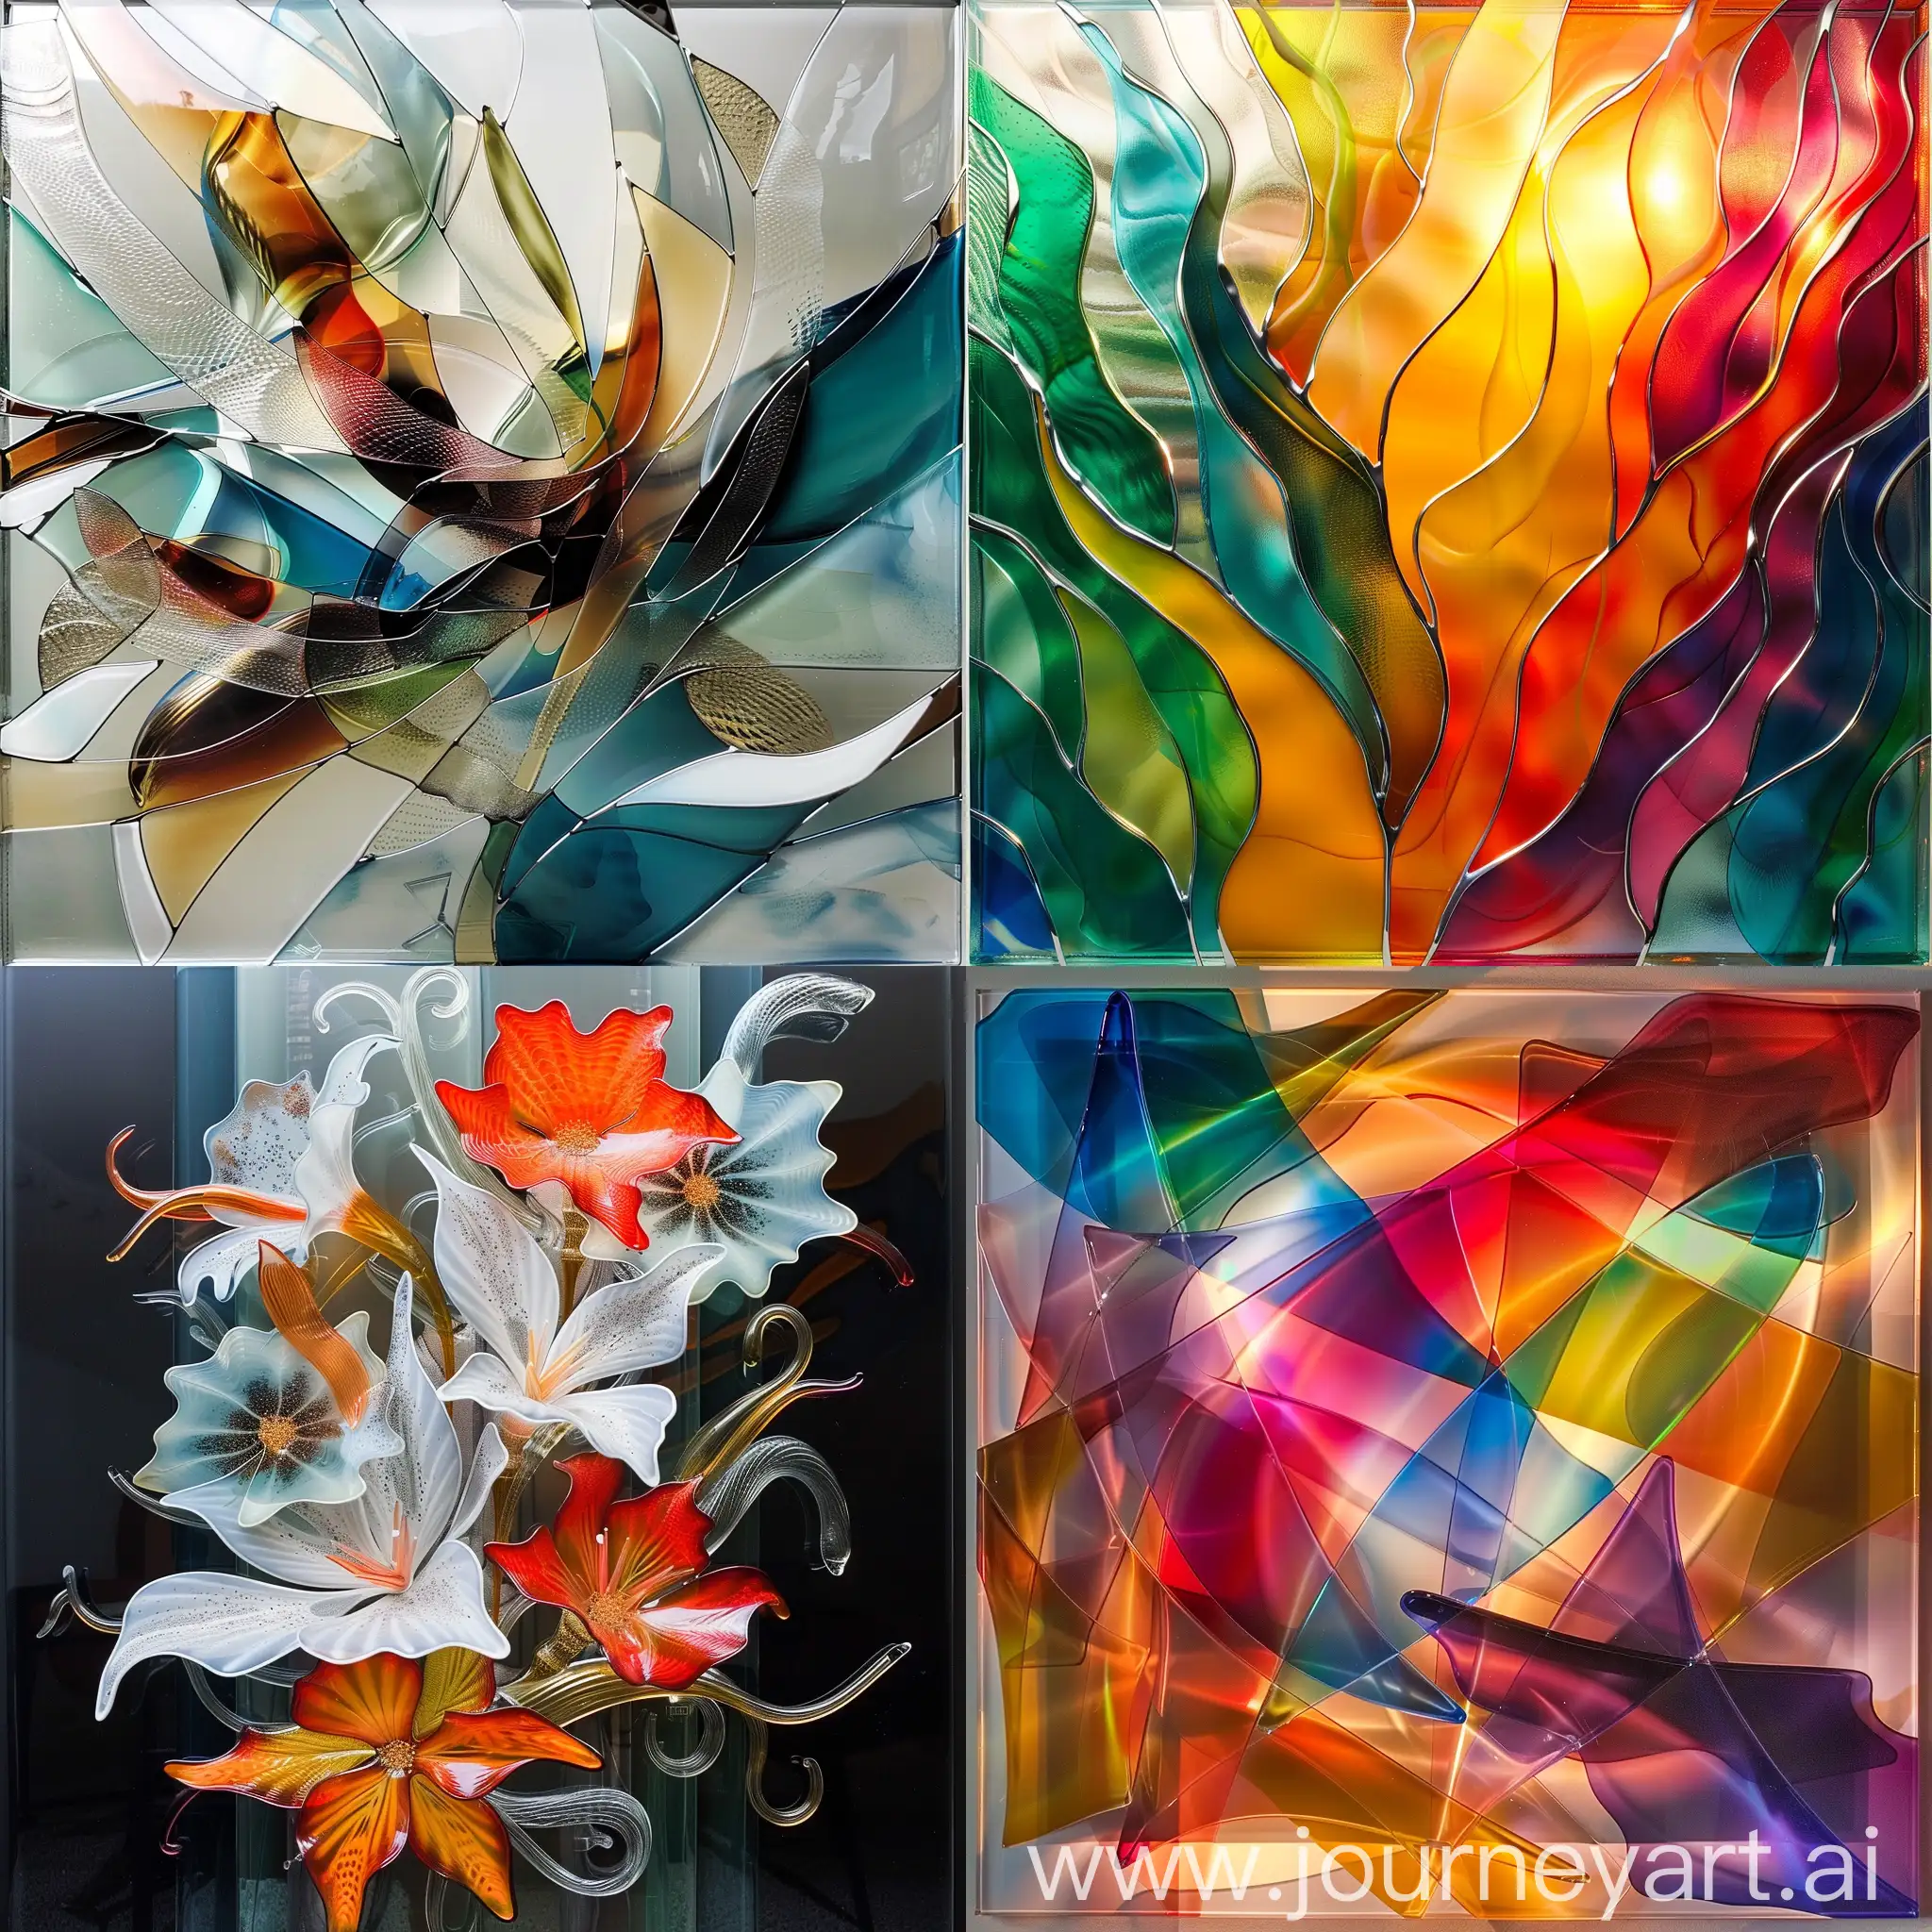 Exquisite-Glass-Artwork-Displaying-Vibrant-Colors-and-Intricate-Patterns